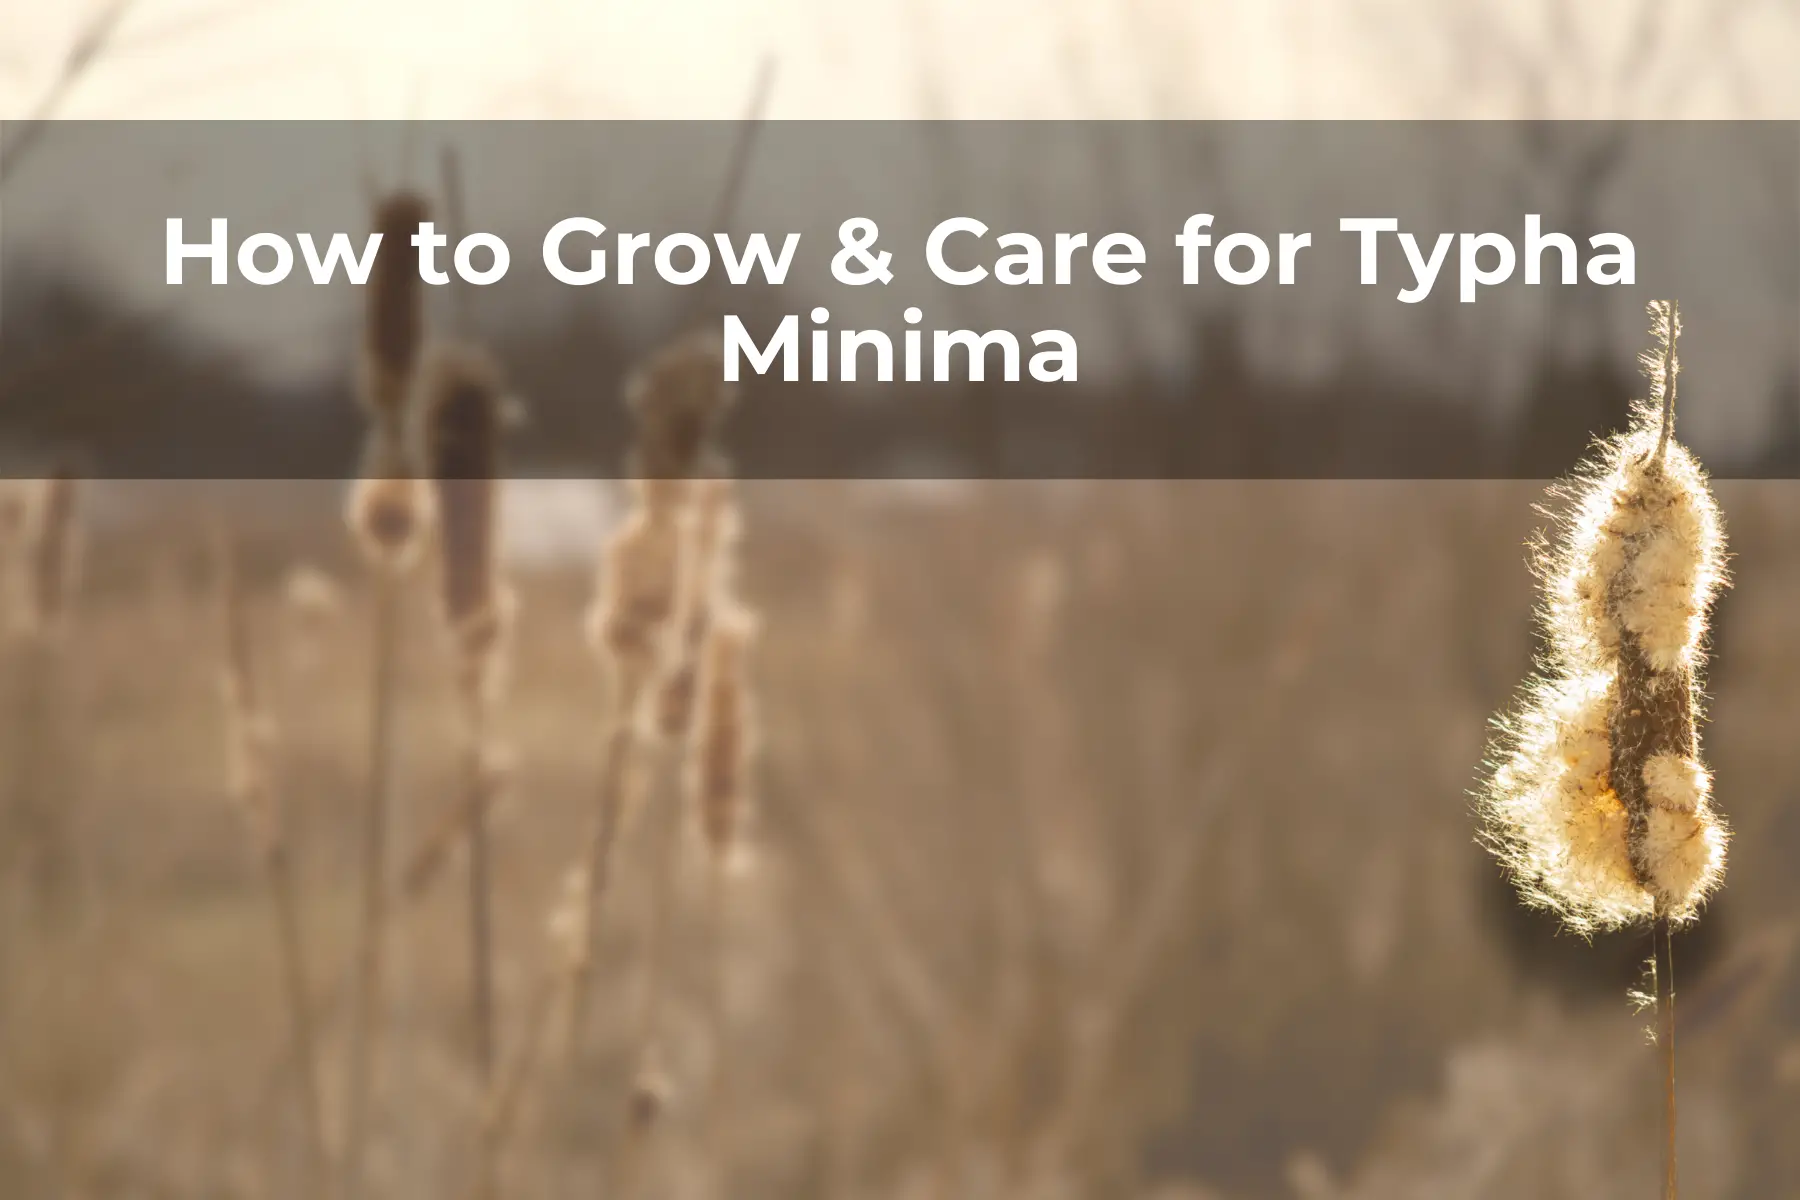 How to Grow & Care for Typha Minima